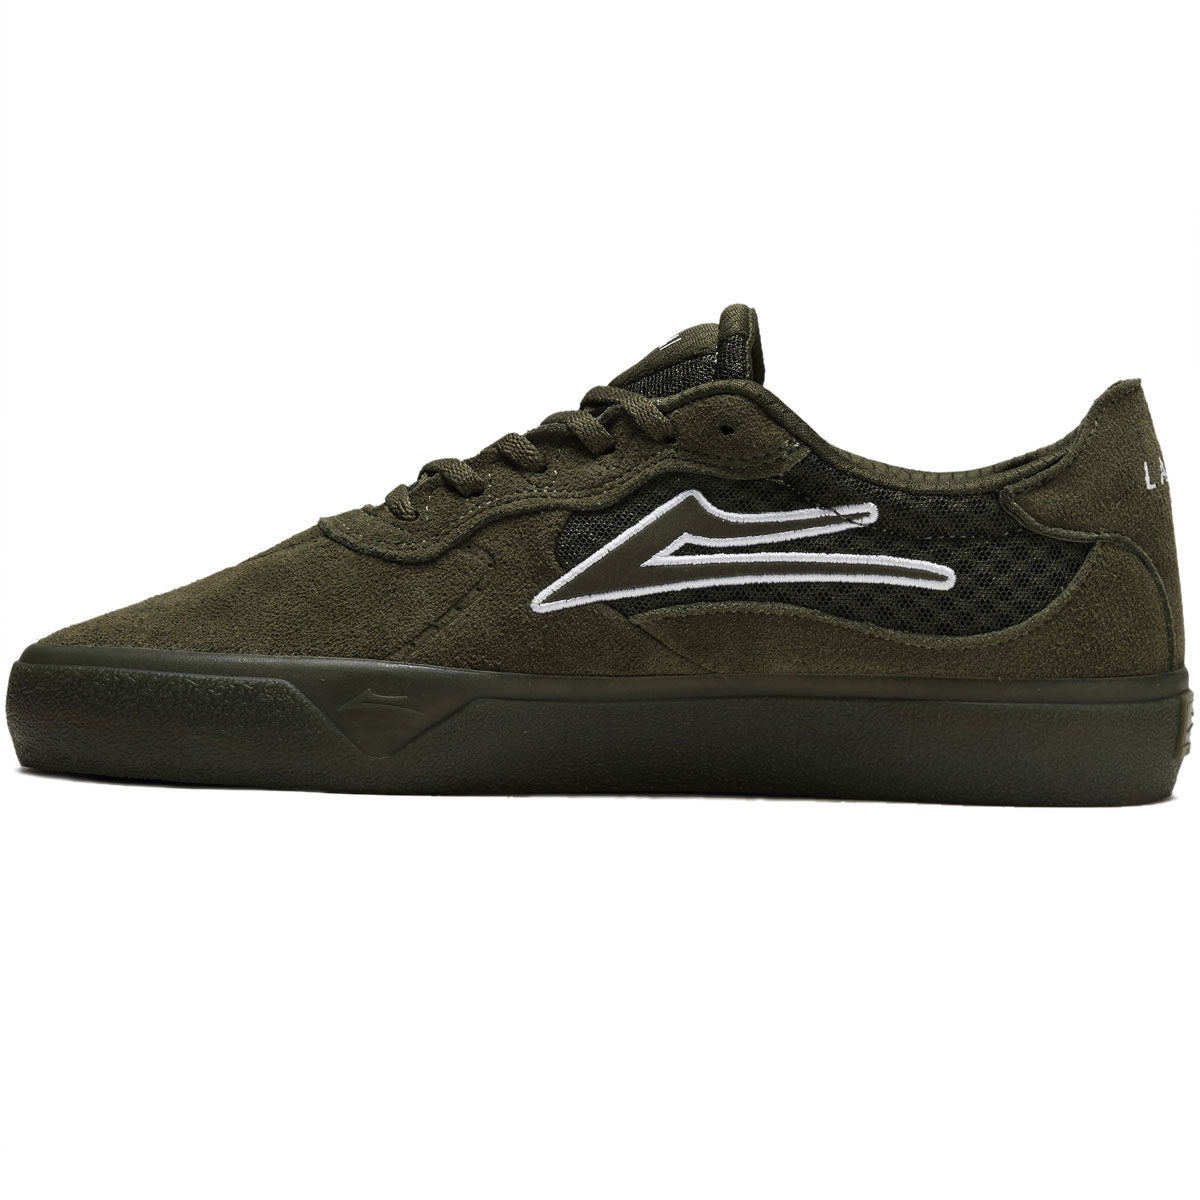 Lakai Essex Shoes - Chive Suede image 2